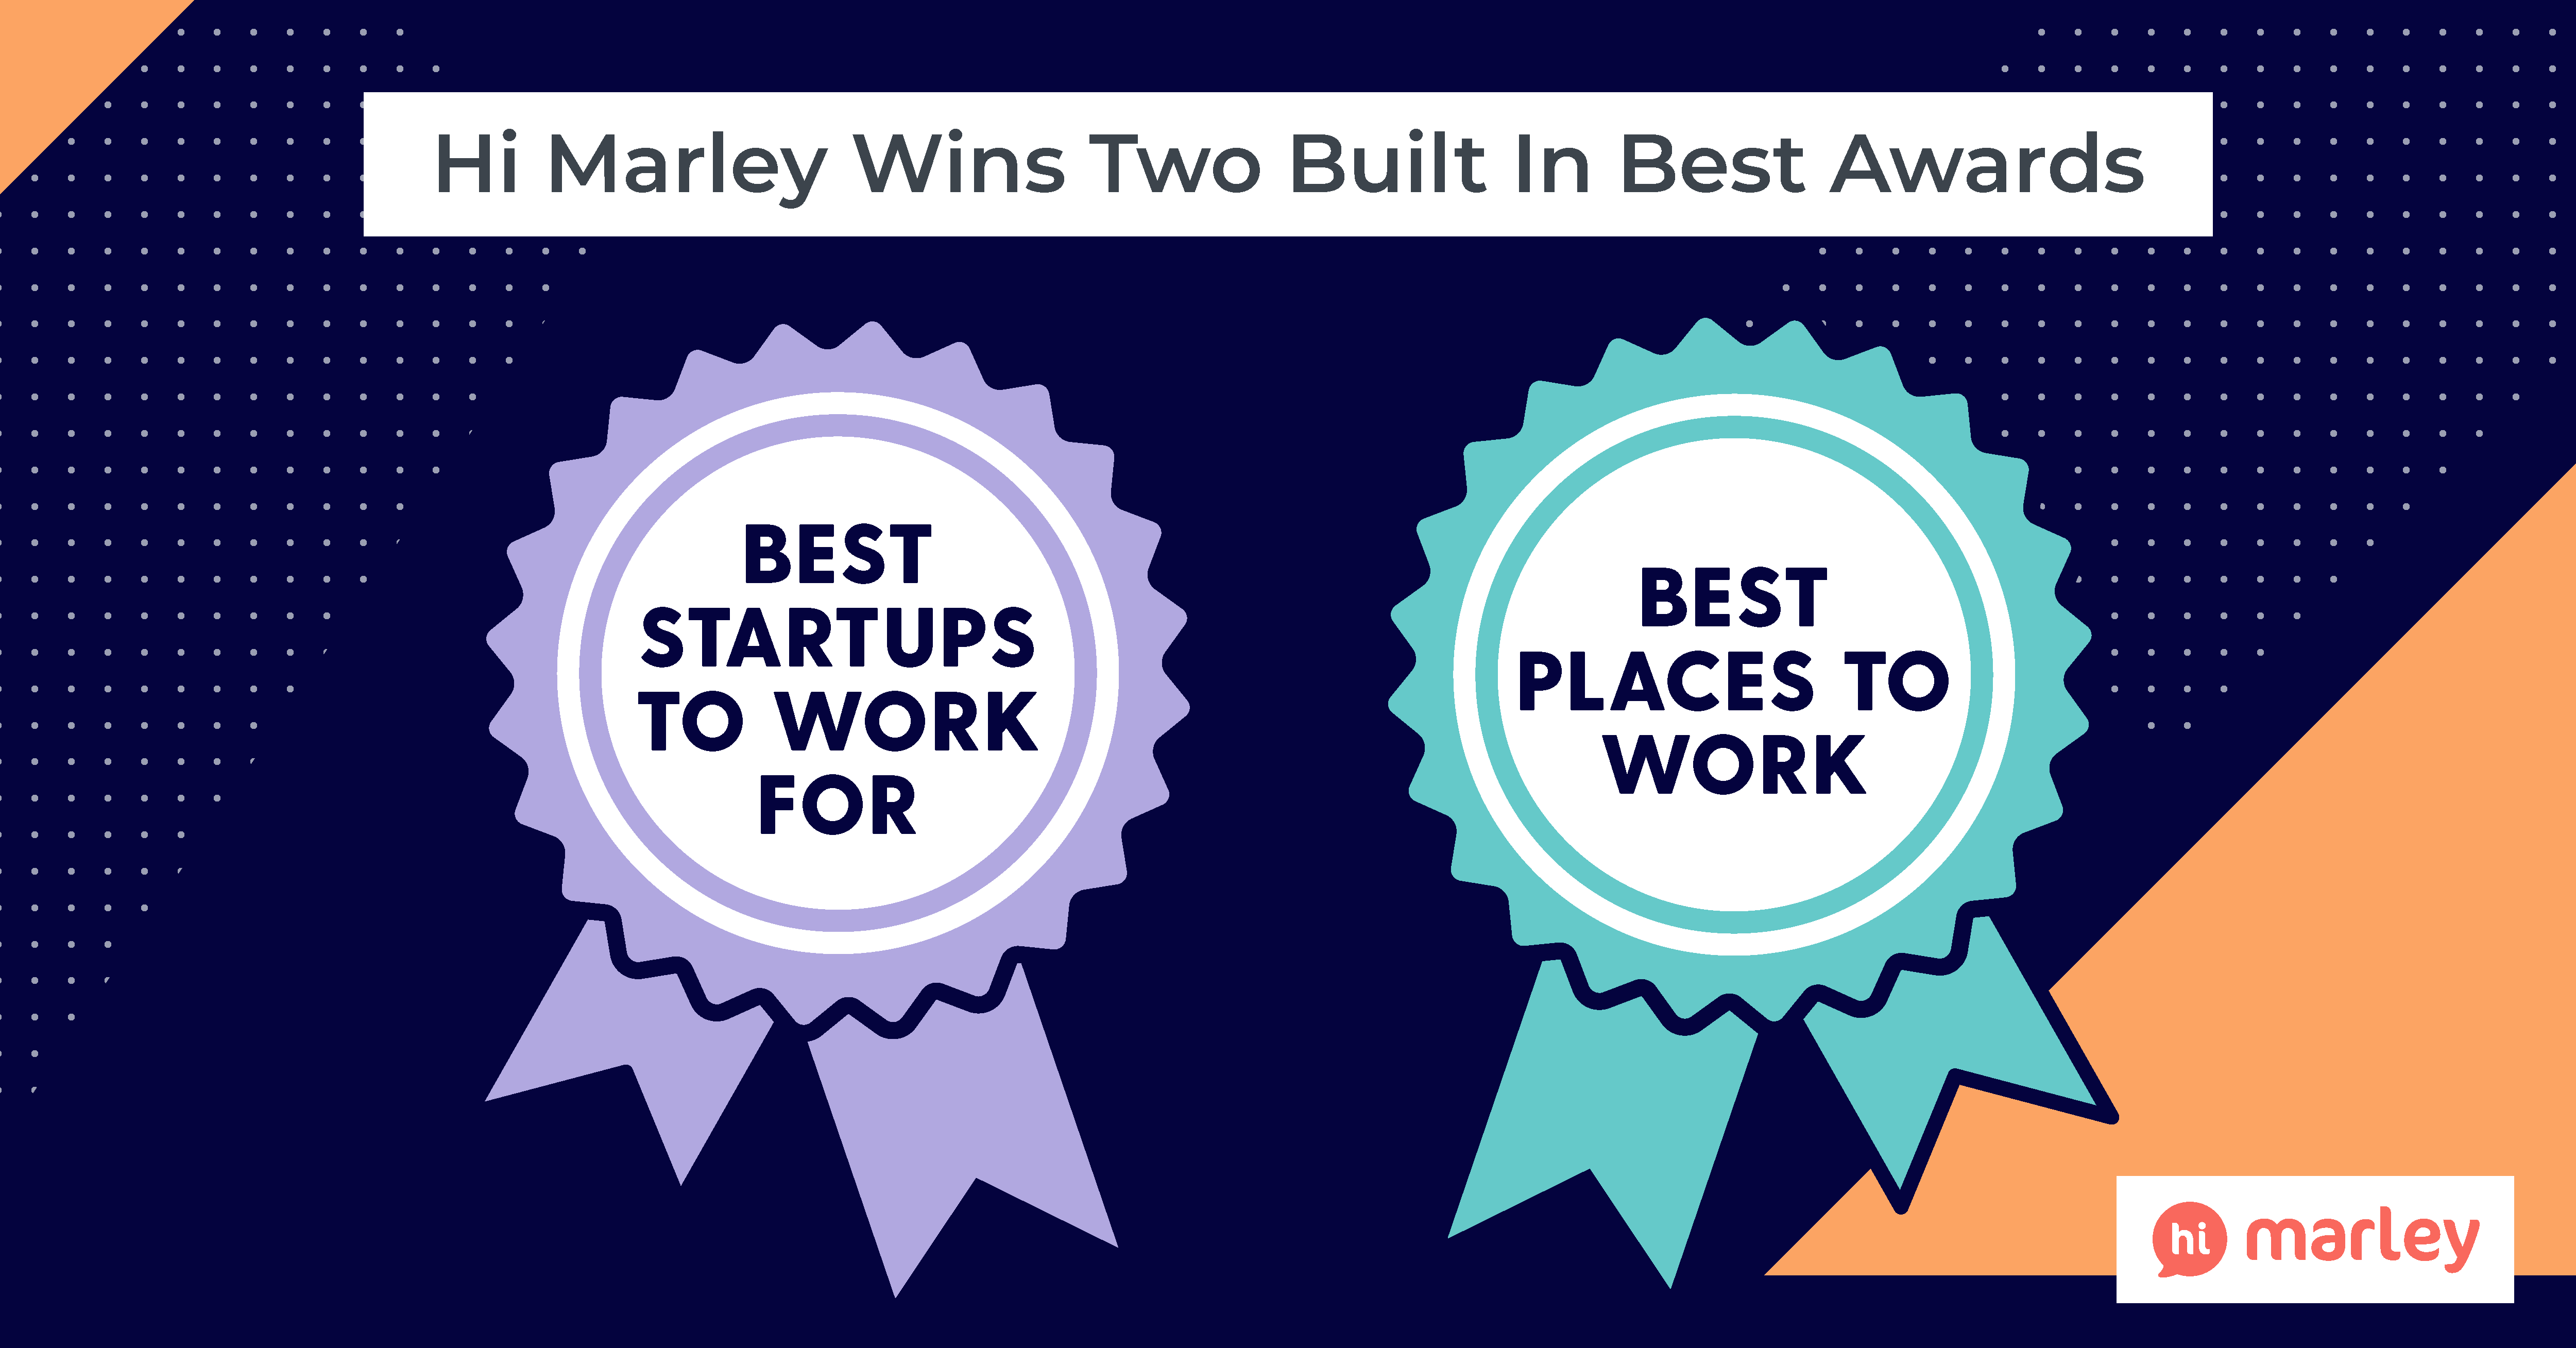 Built In’s 2023 Best Places To Work Awards Honor Hi Marley in Two